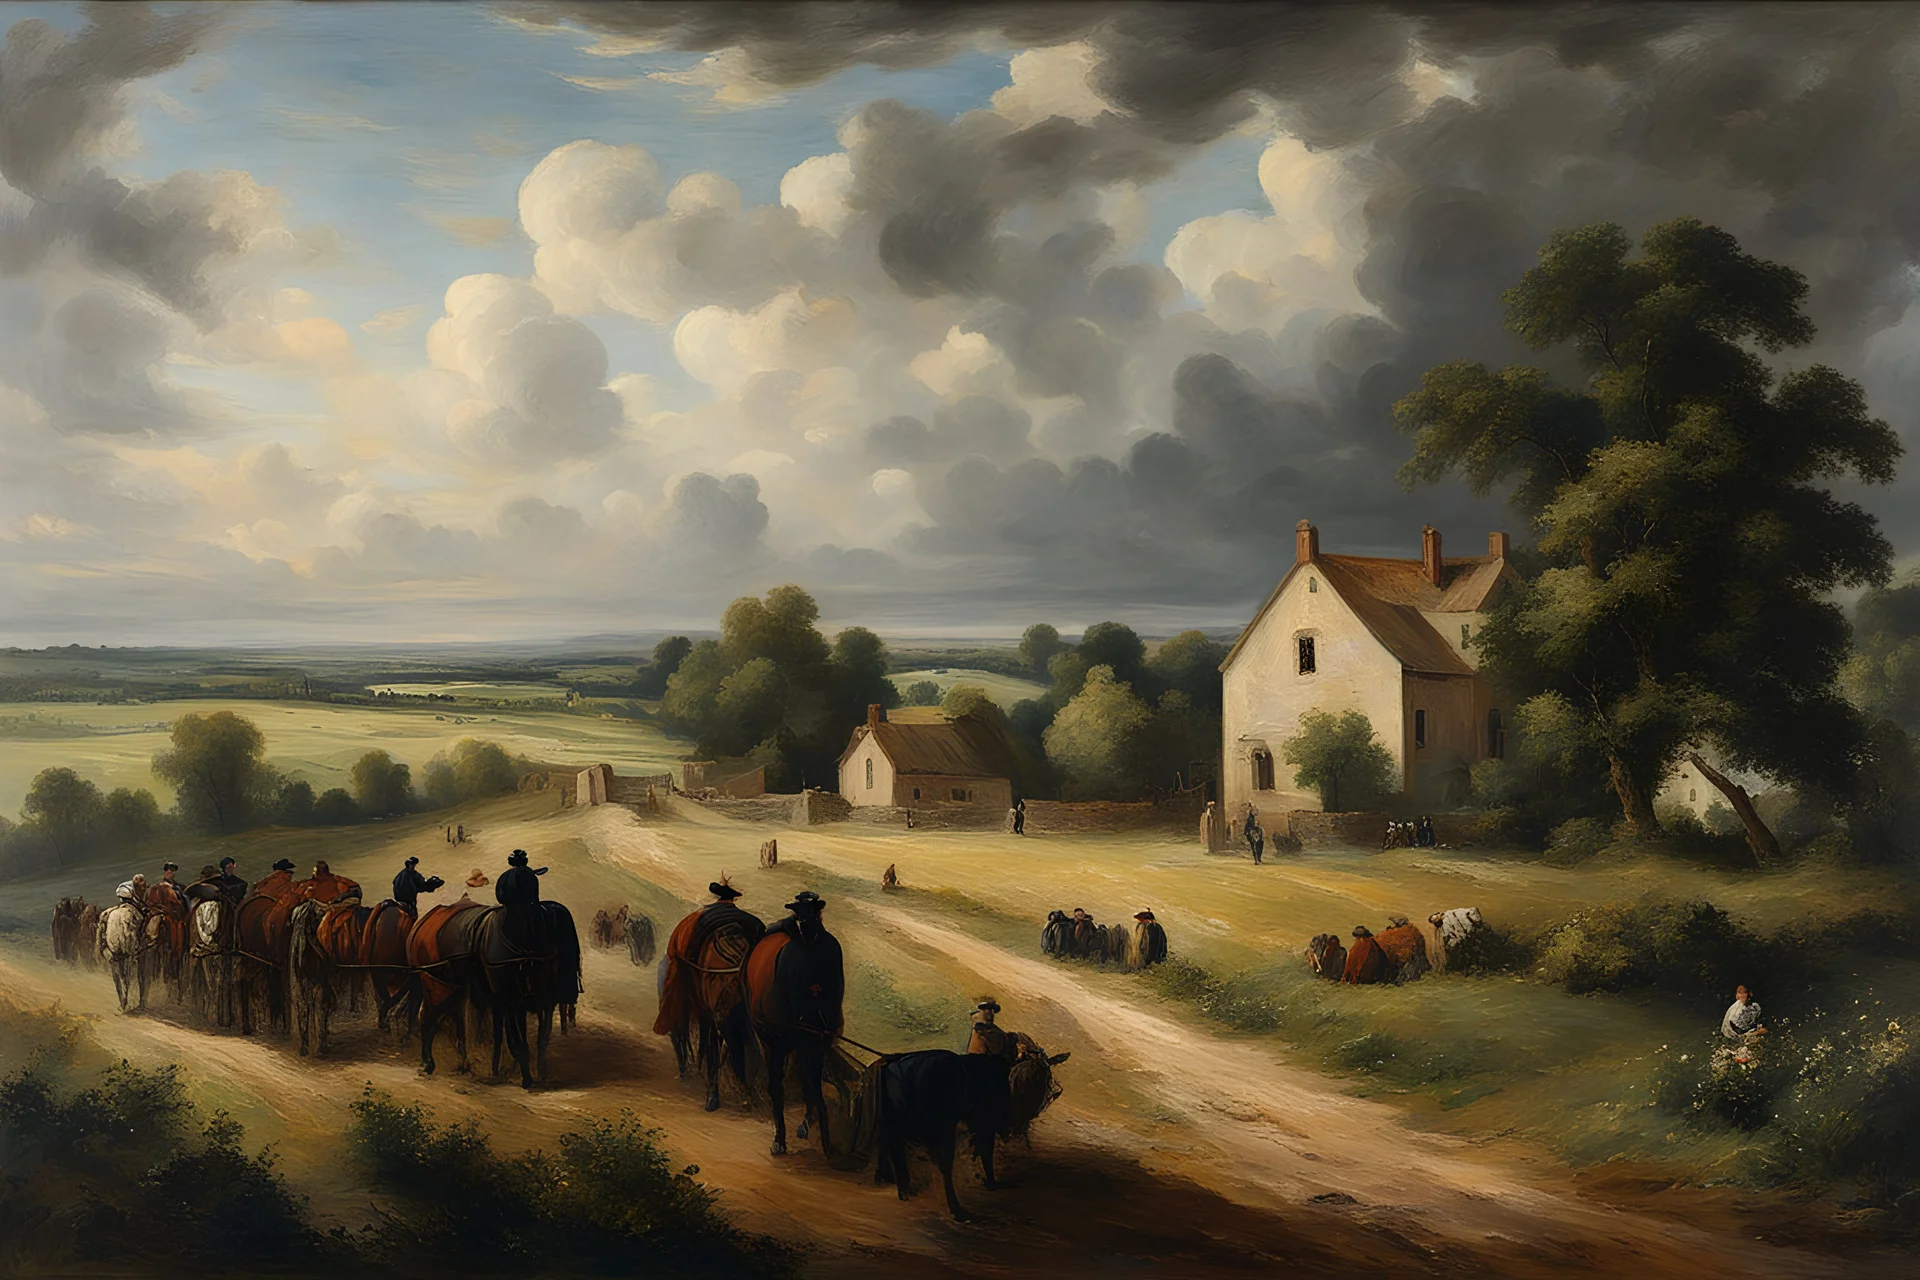 Celebration of the American Farm in the style of John Constable